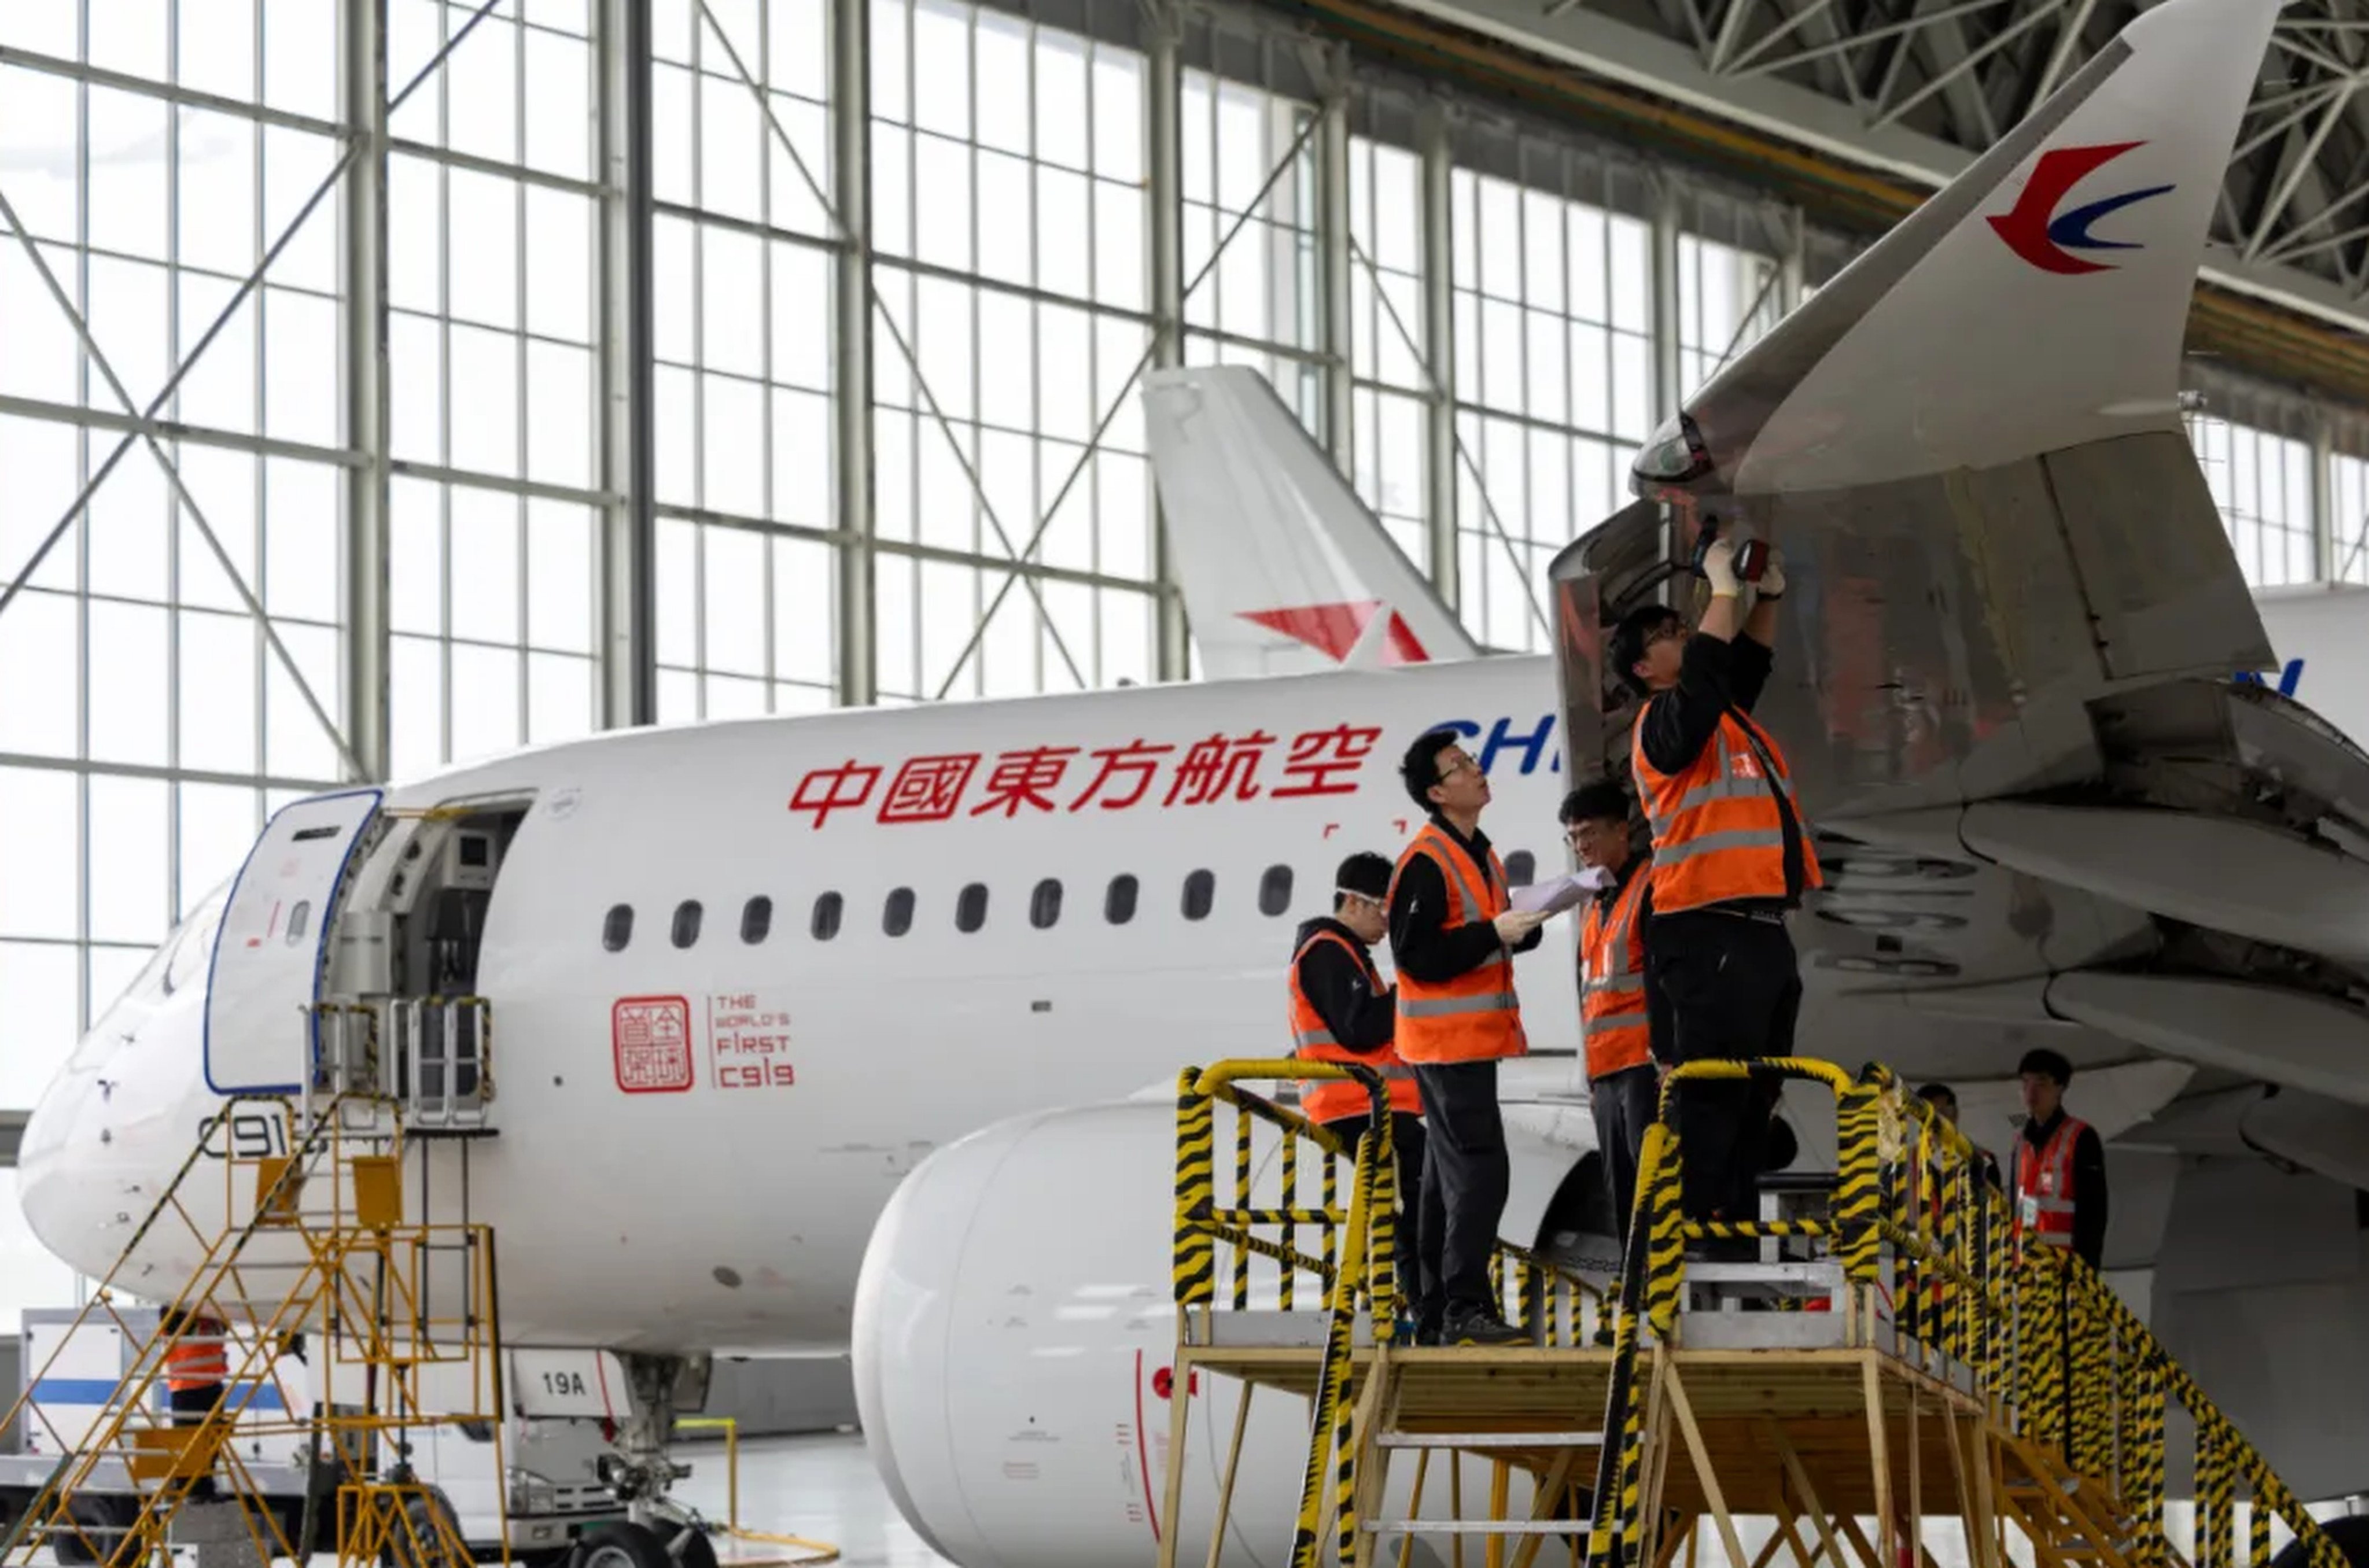 A crew of more than 60 checked the aircraft – refered to as B-919A by China Eastern Airlines – and tested the engines, landing gear and all equipment in the cabin, according to the regulator. Photo: Civil Aviation Administration of China